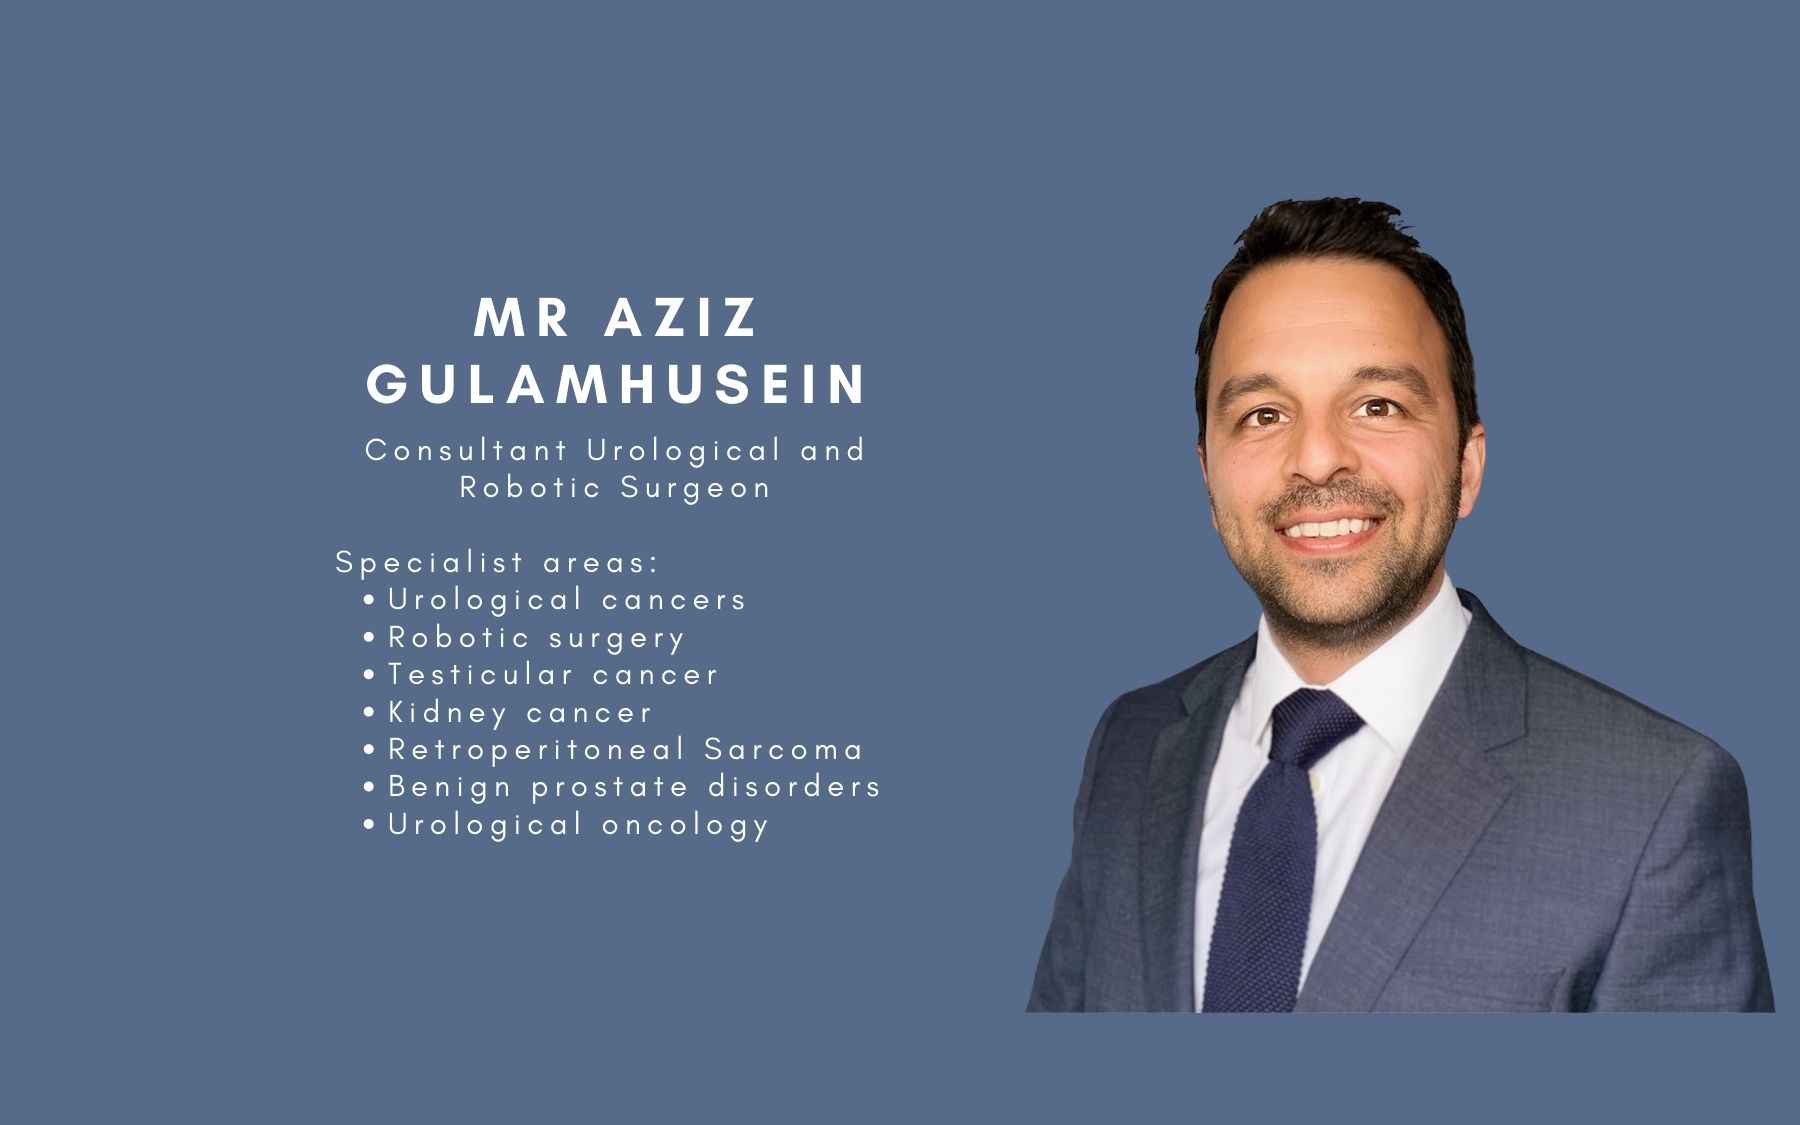 Consultant Urological and Robotic Surgeon